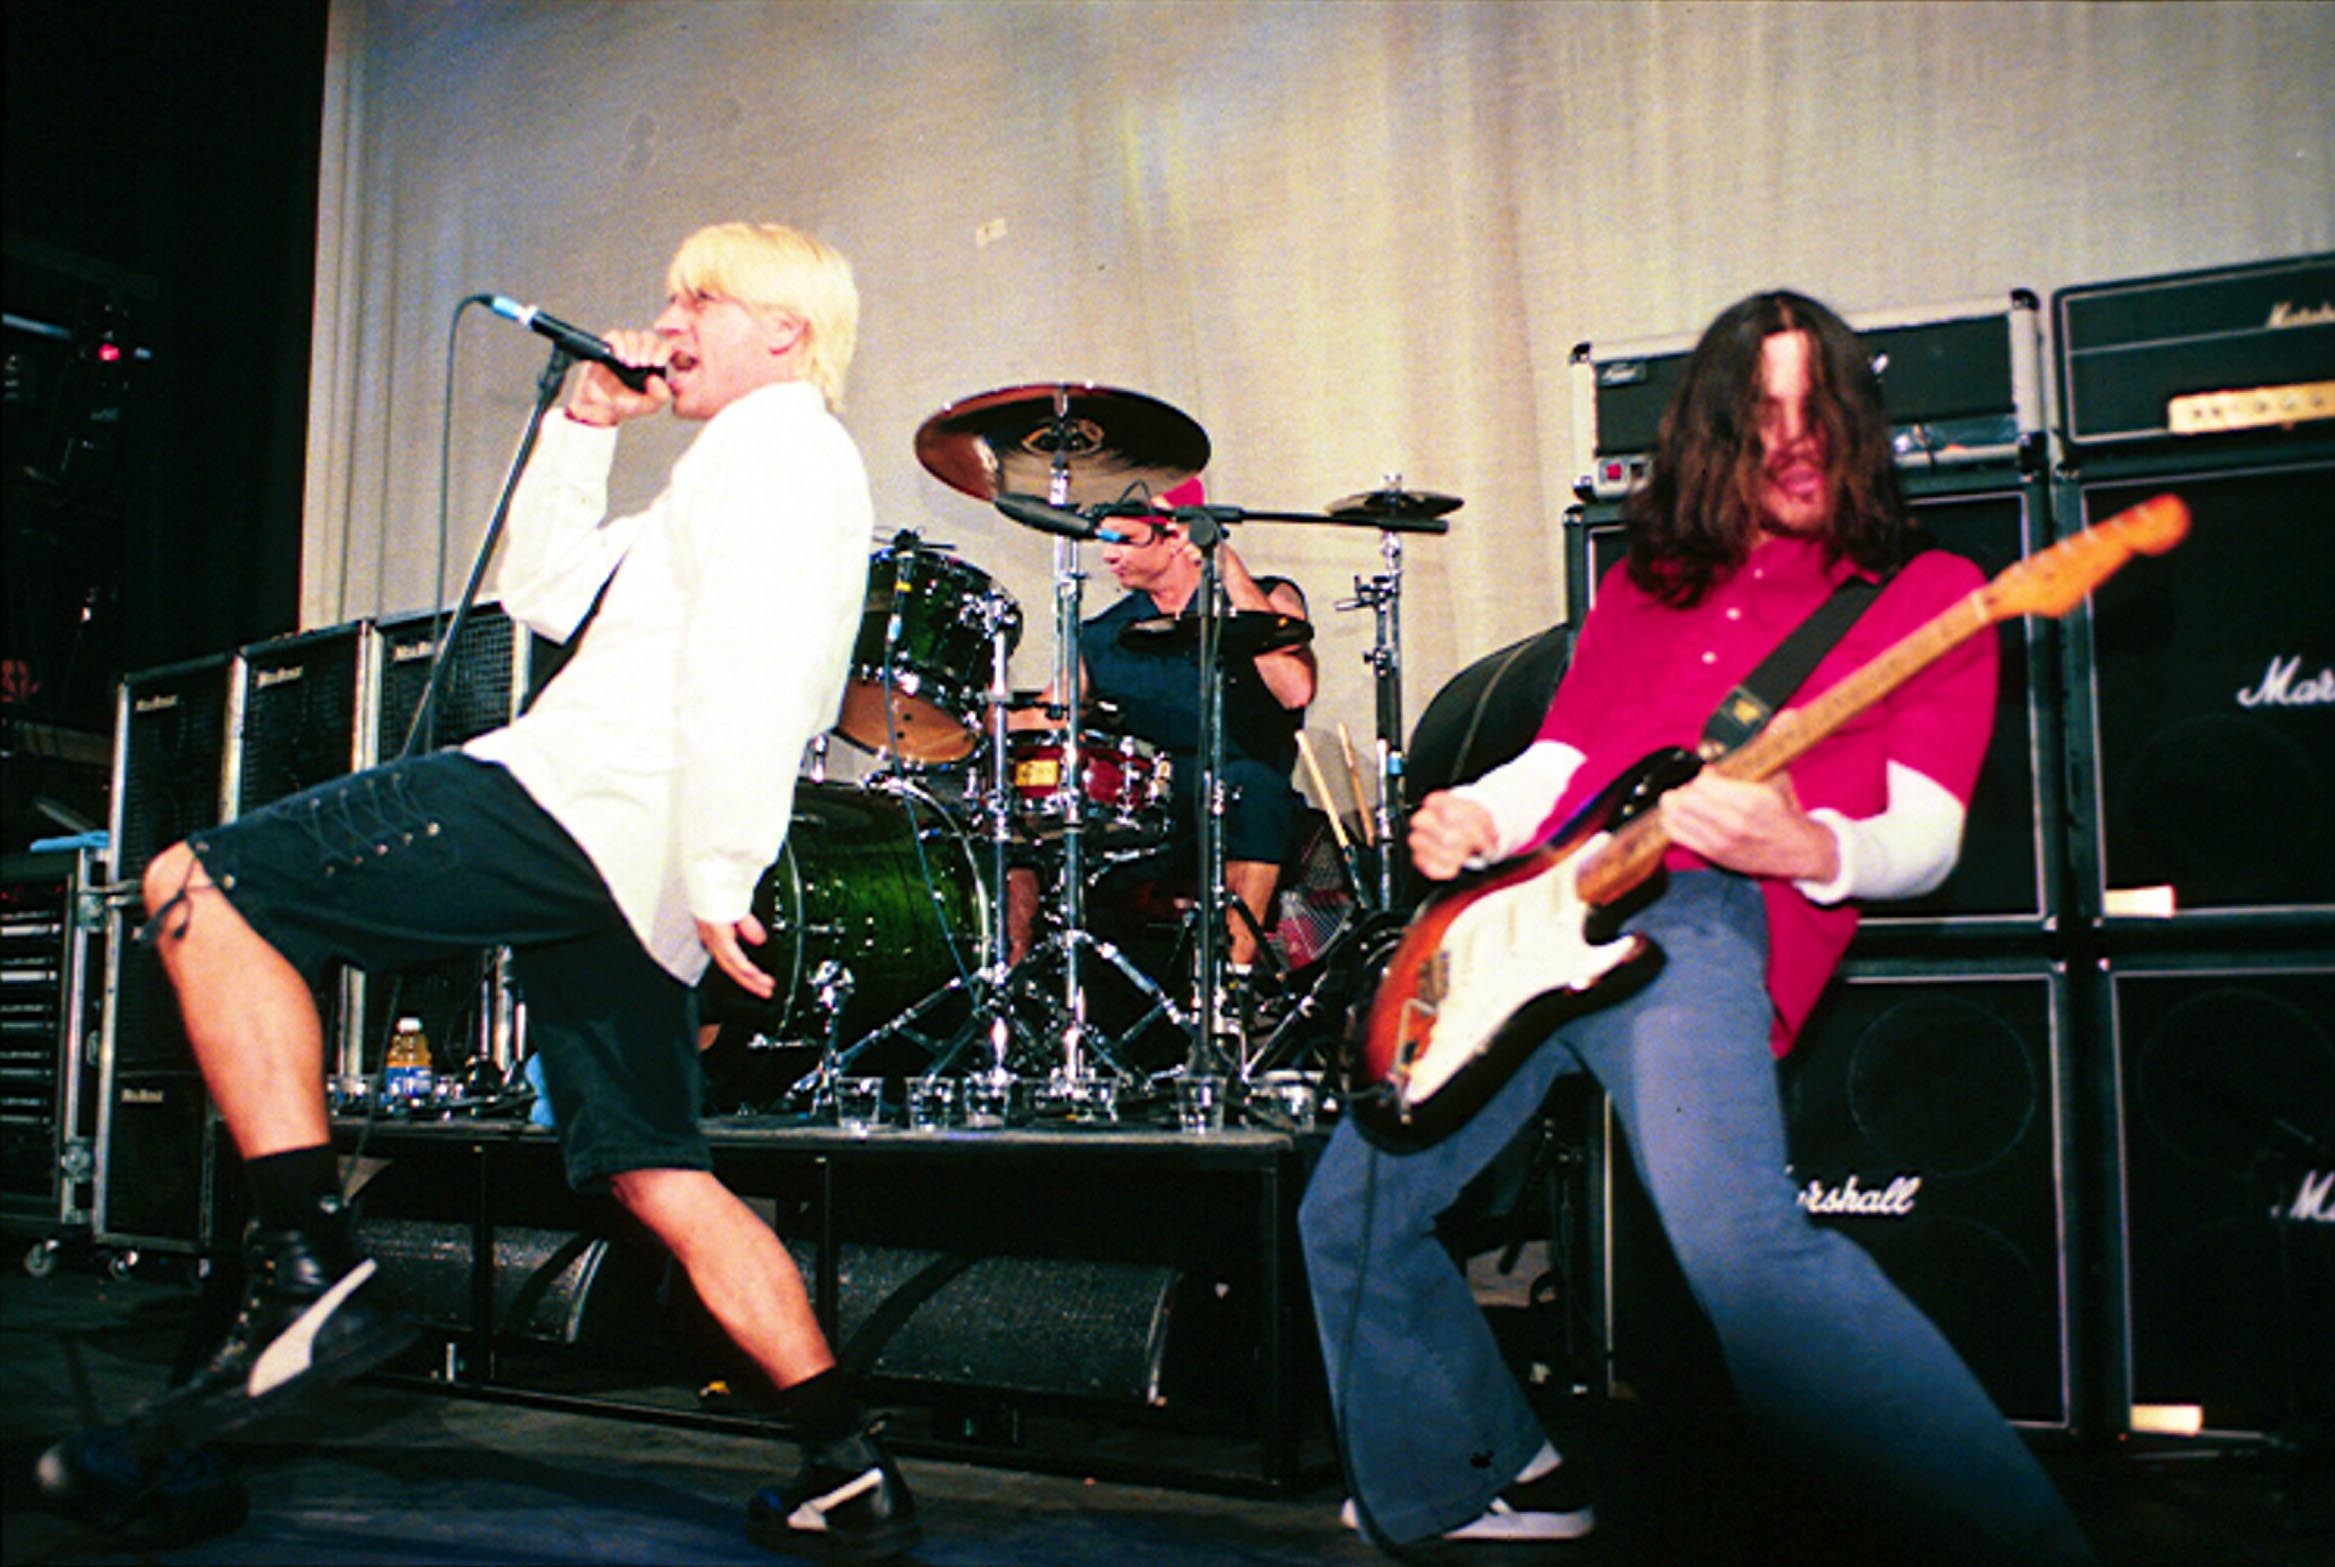 Red Hot Chili Peppers perform onstage in London in 1999.